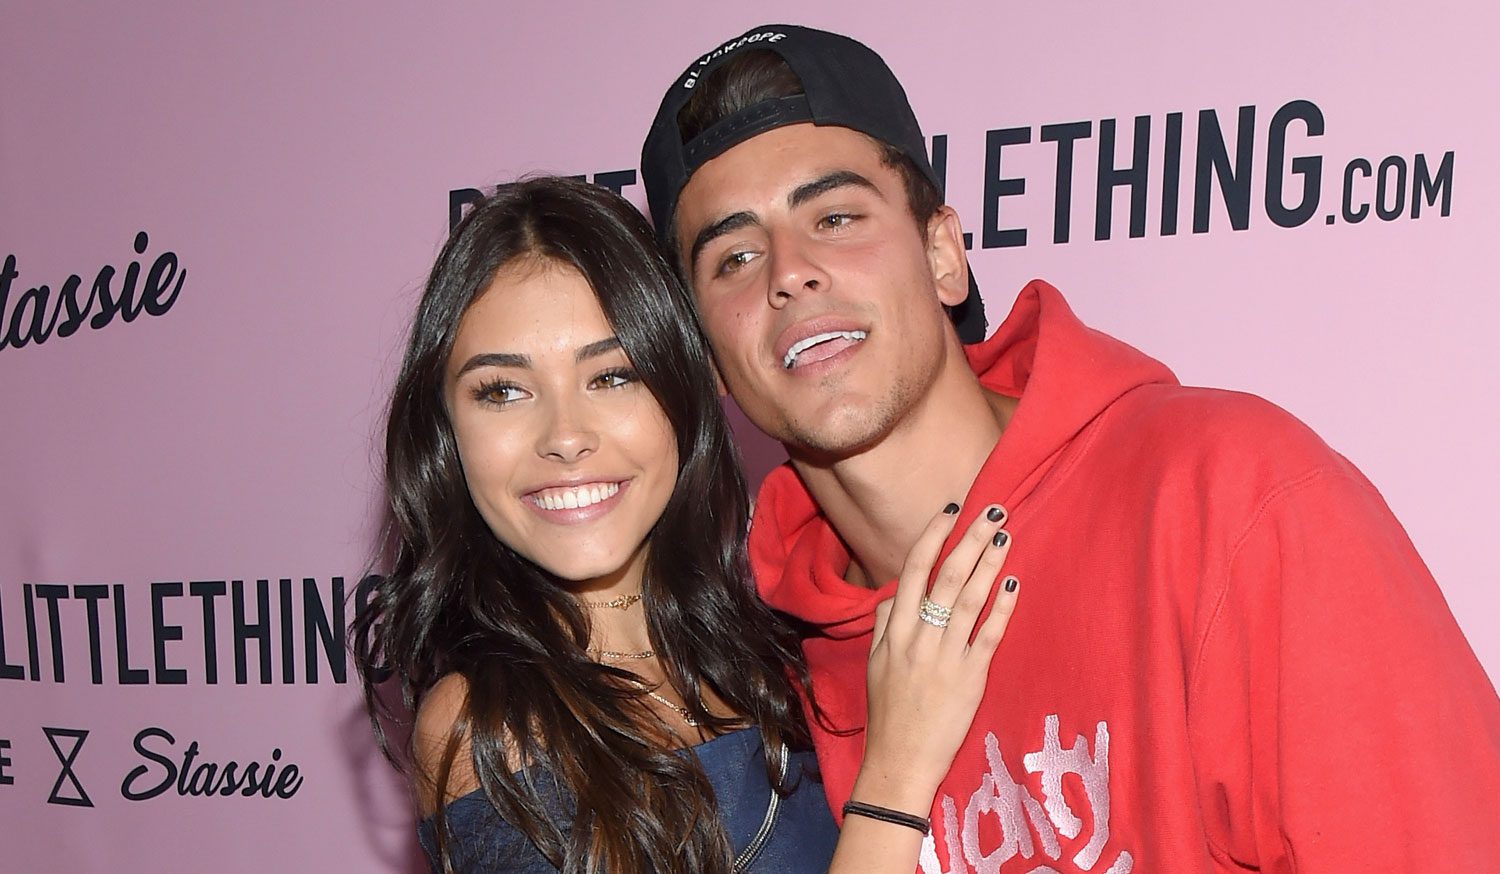 Madison Beer and Jack Gilinsky. Madison Beer 19 лет. Who is date who